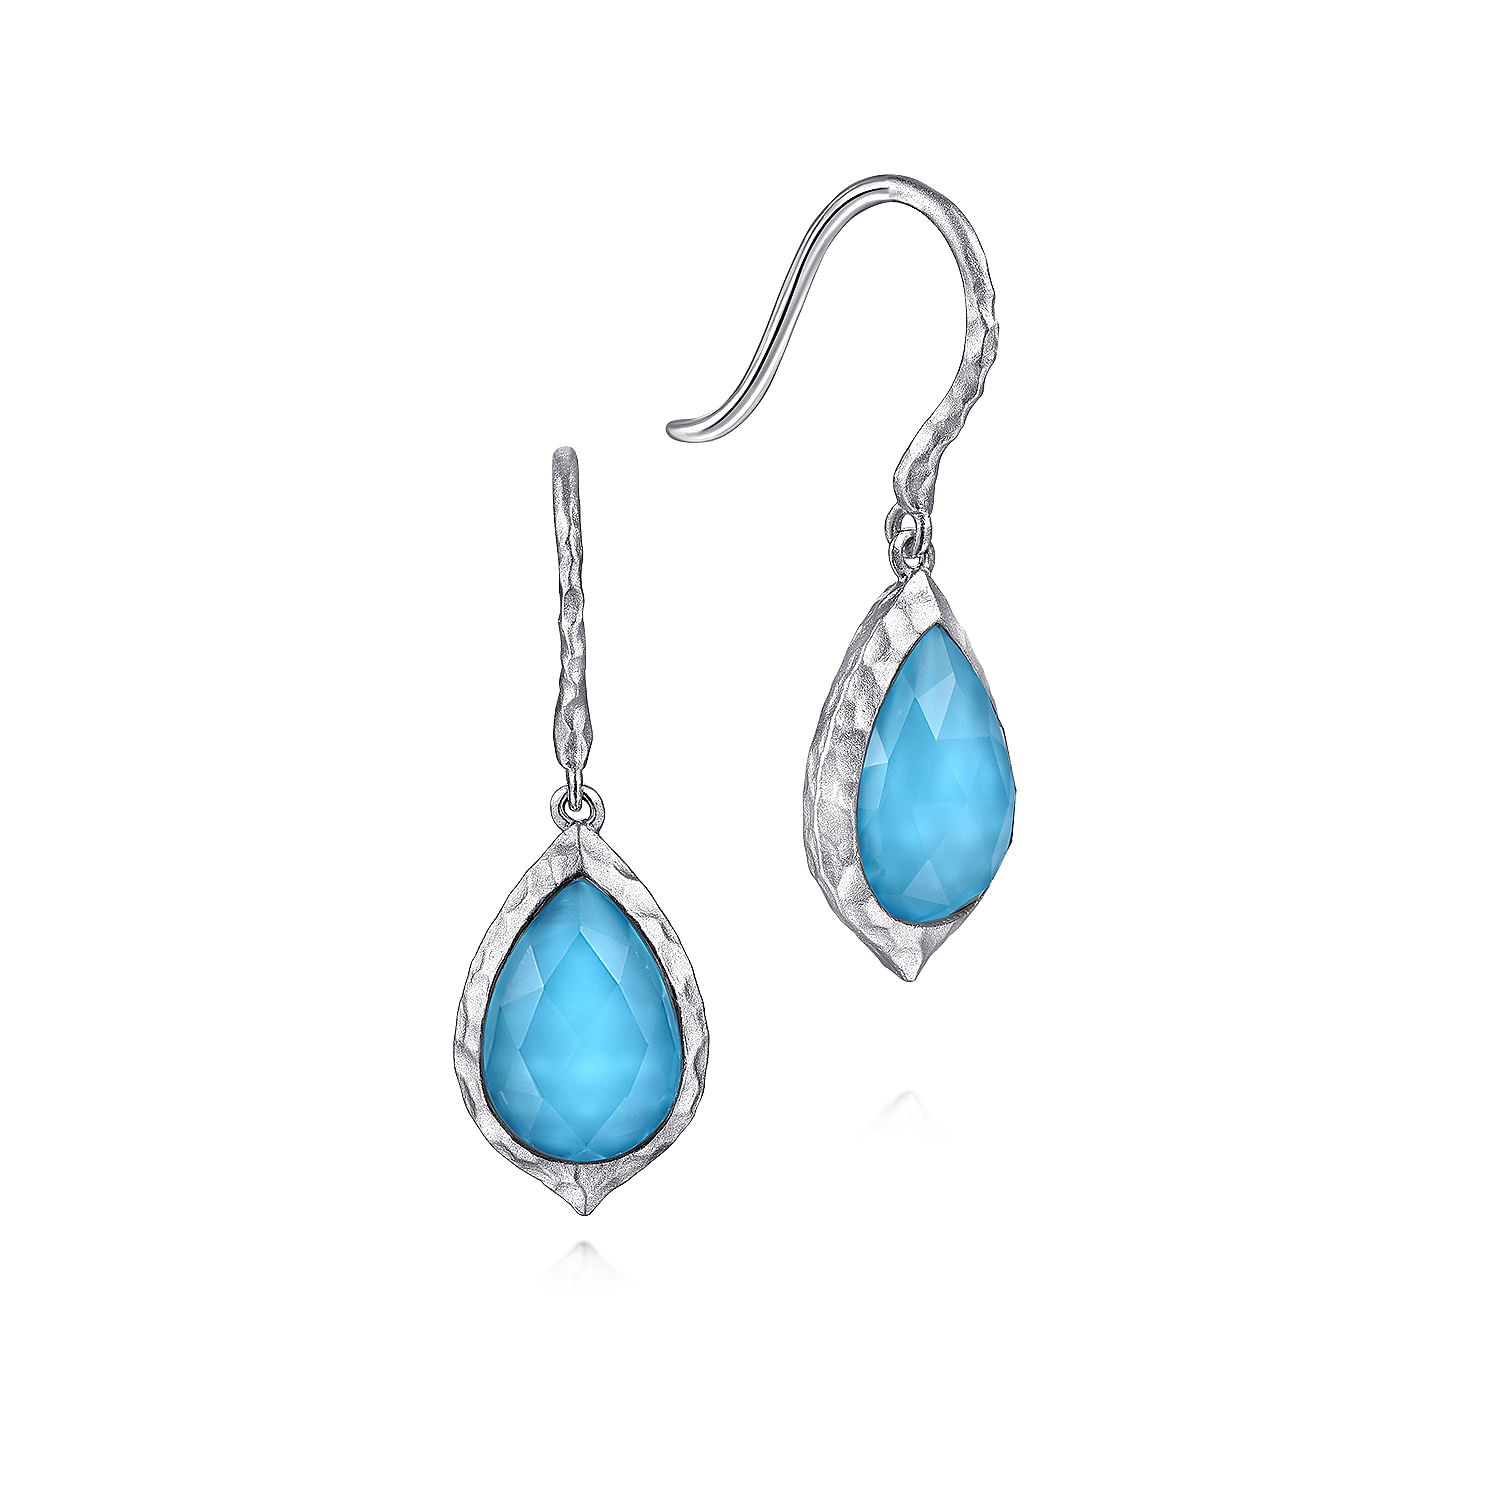 Gabriel - 925 Sterling Silver Hammered Pear Shaped Rock Crystal/Turquoise Drop Earrings